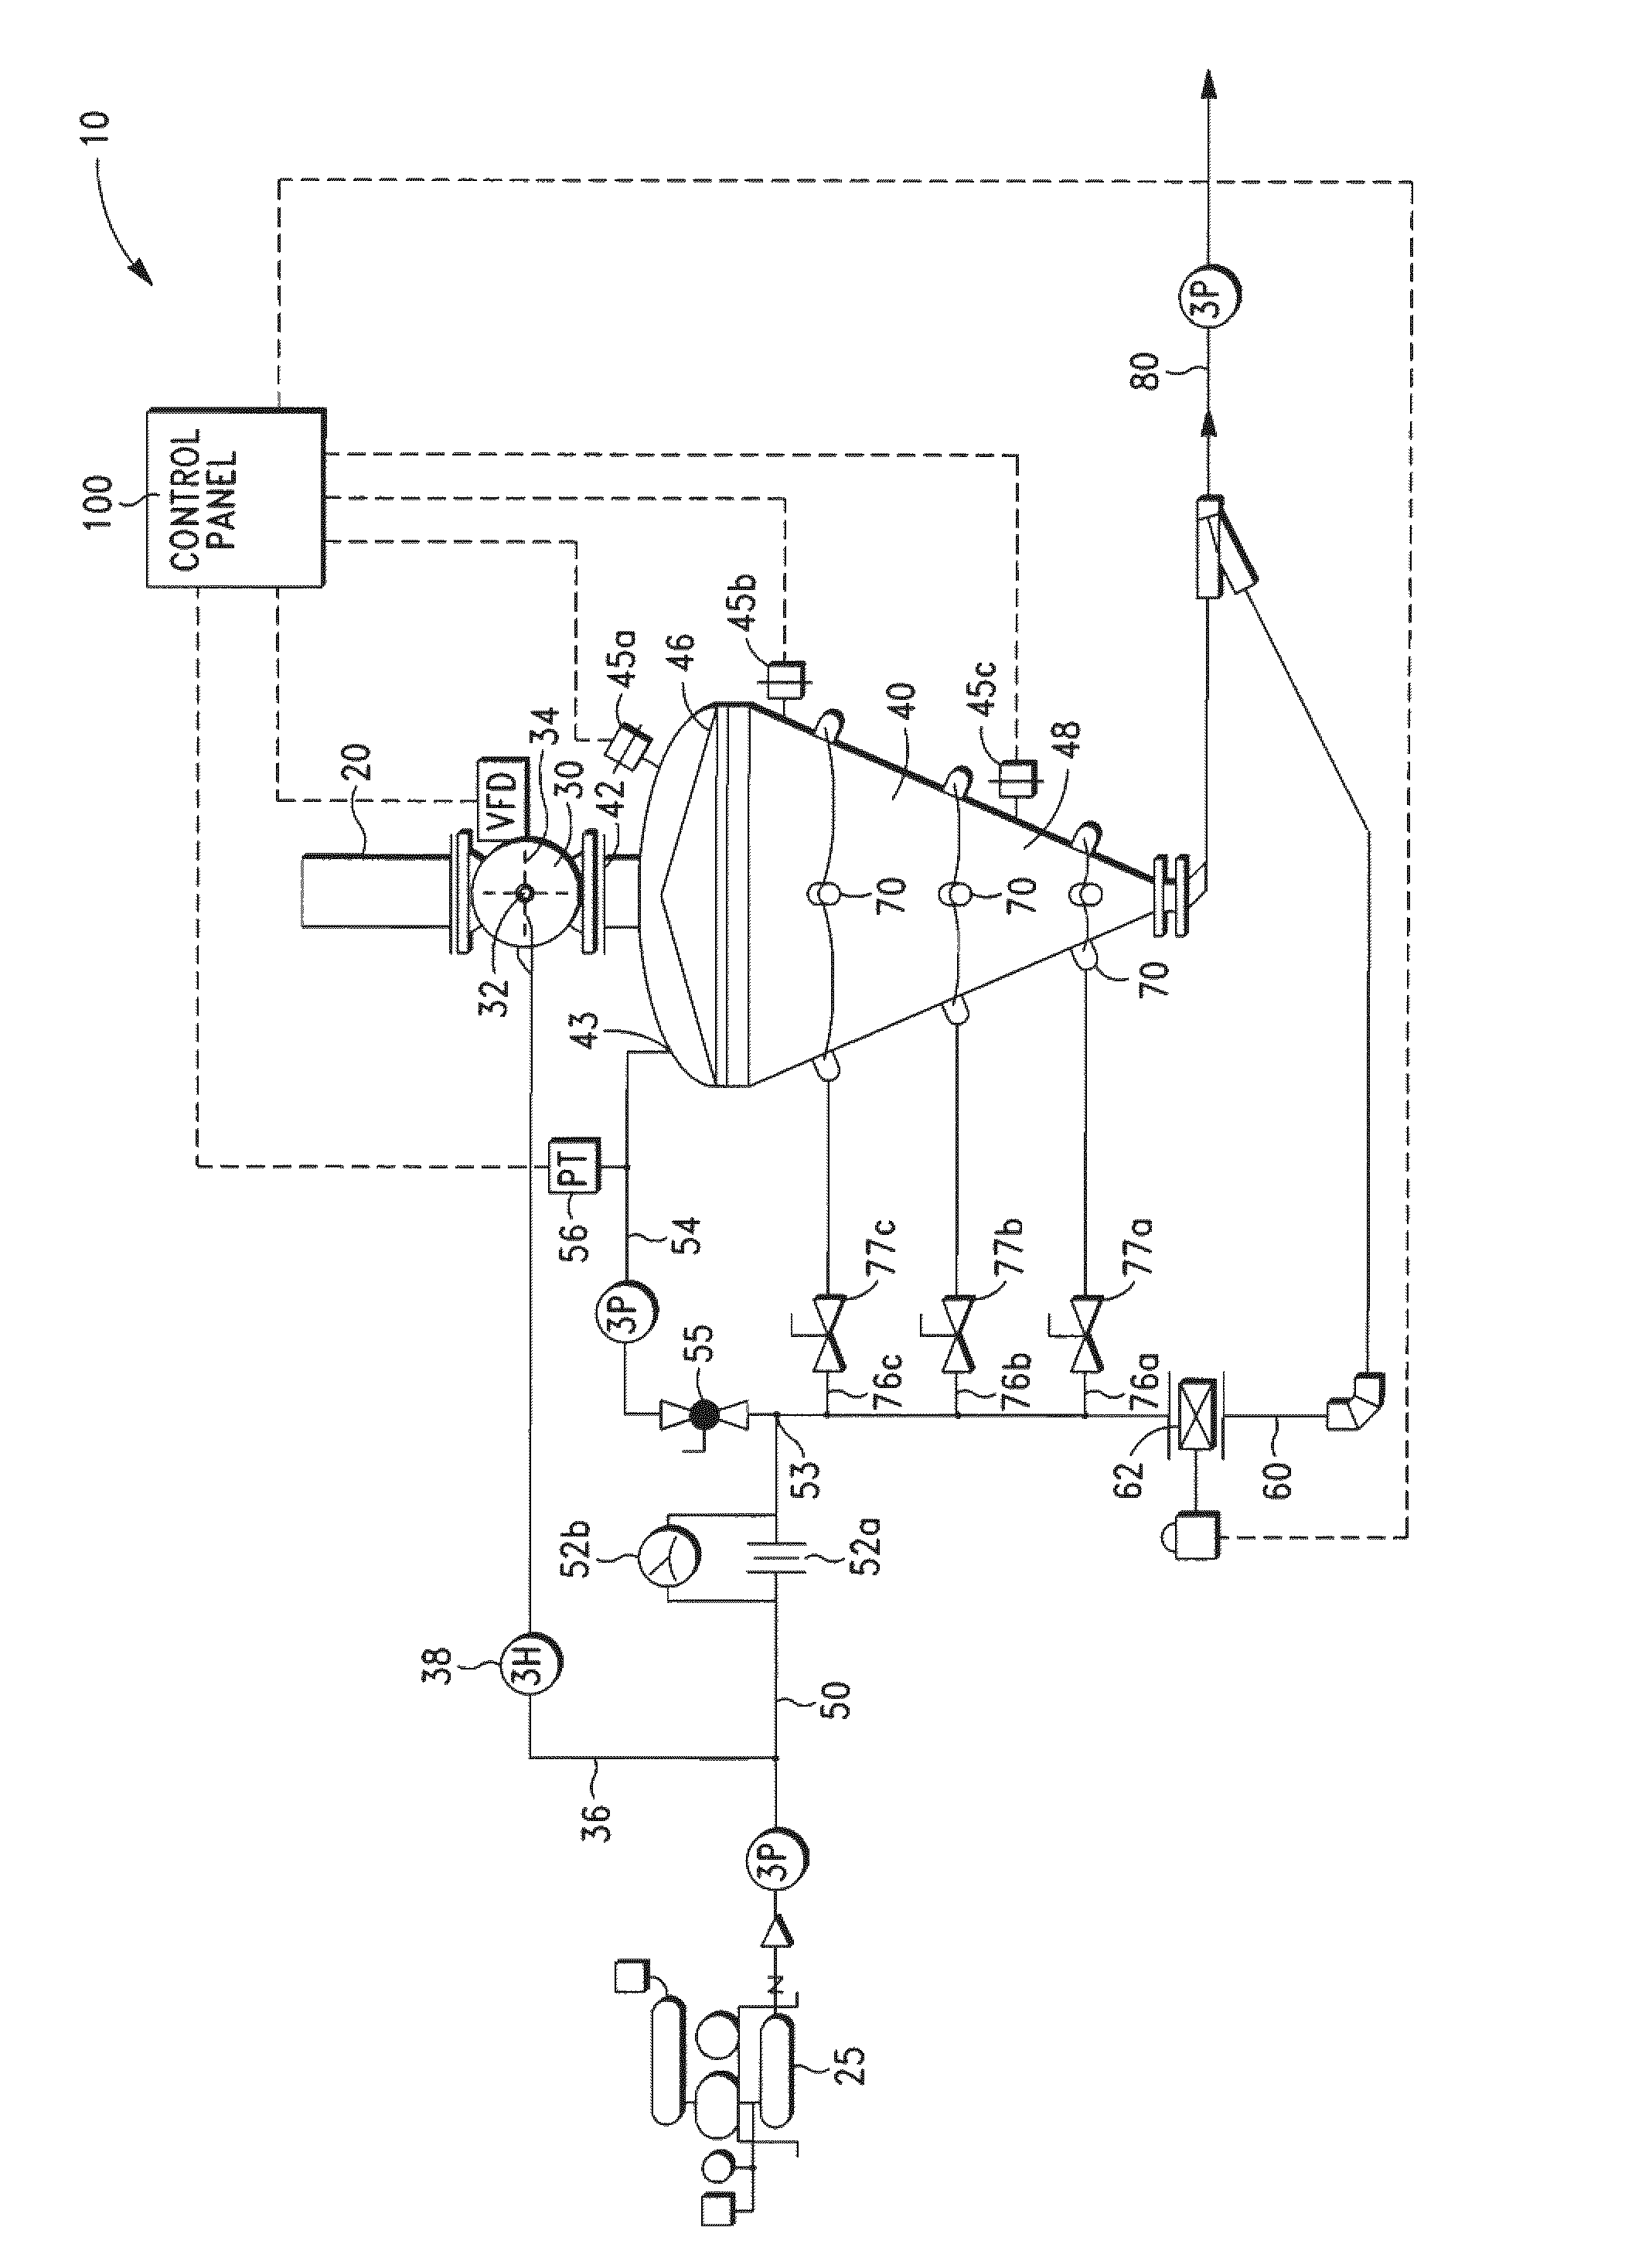 Continuous semi-dense pneumatic conveying system and method